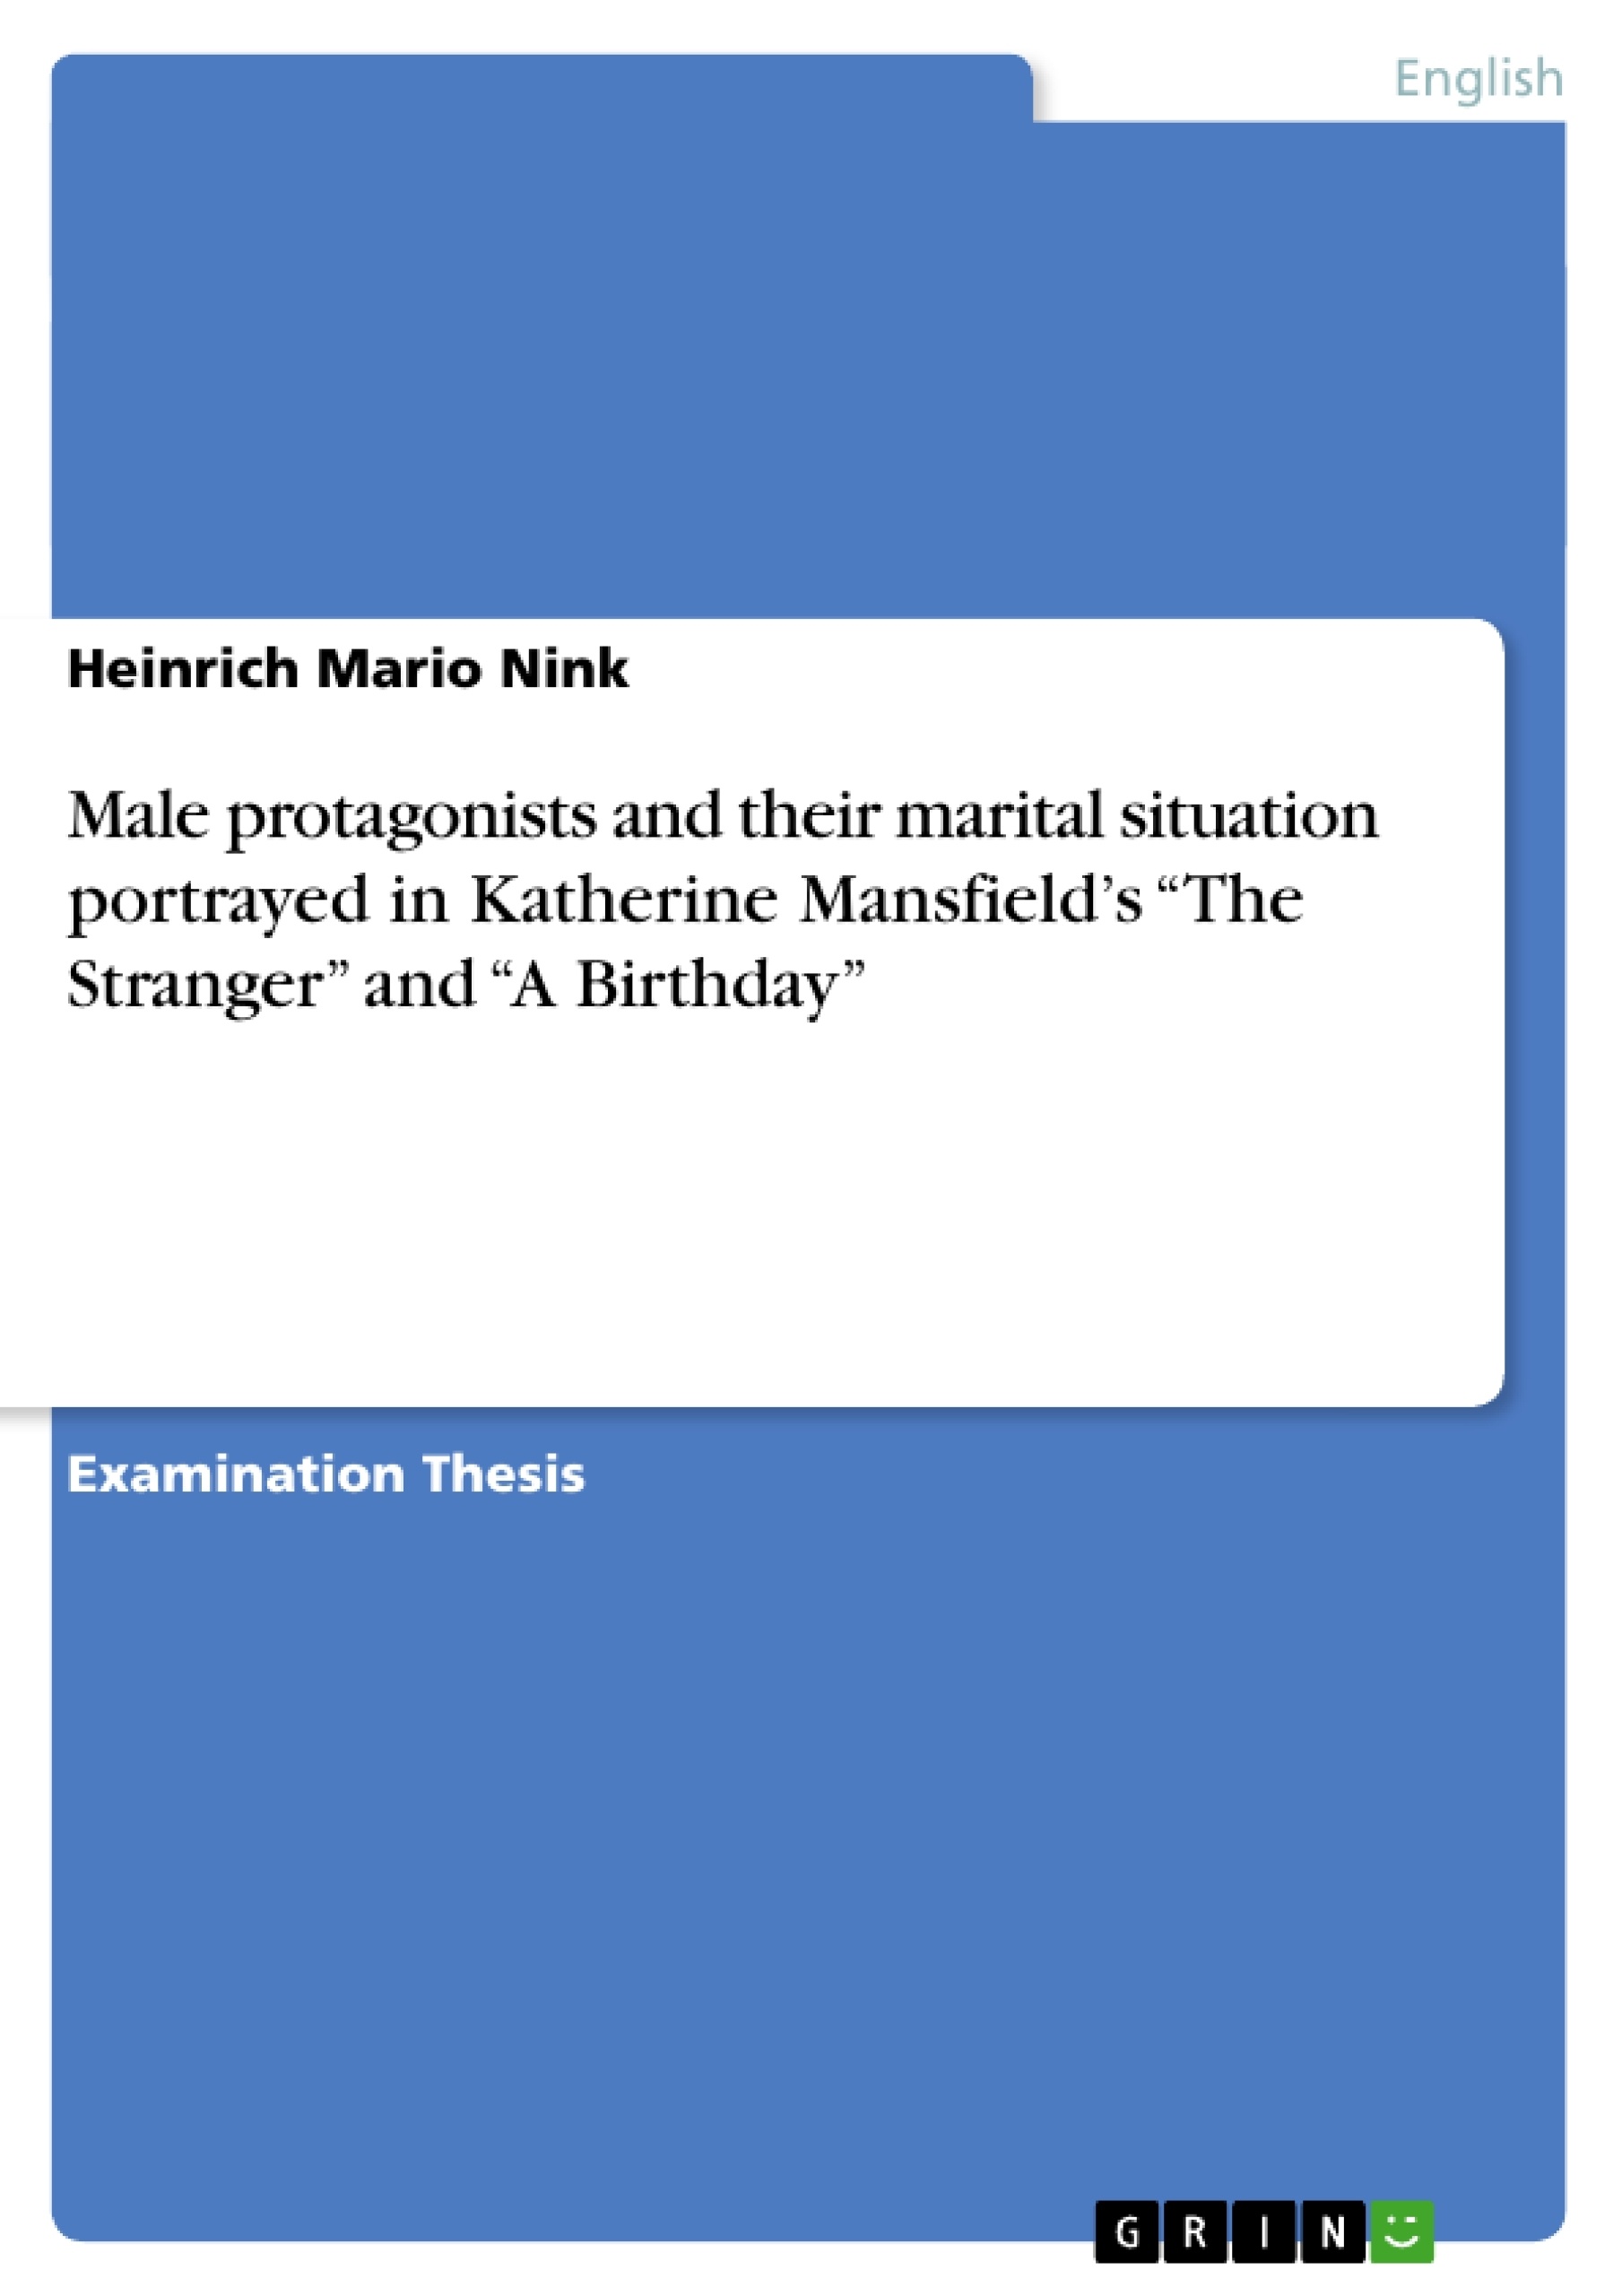 Titre: Male protagonists and their marital situation portrayed in Katherine Mansfield’s “The Stranger” and “A Birthday”